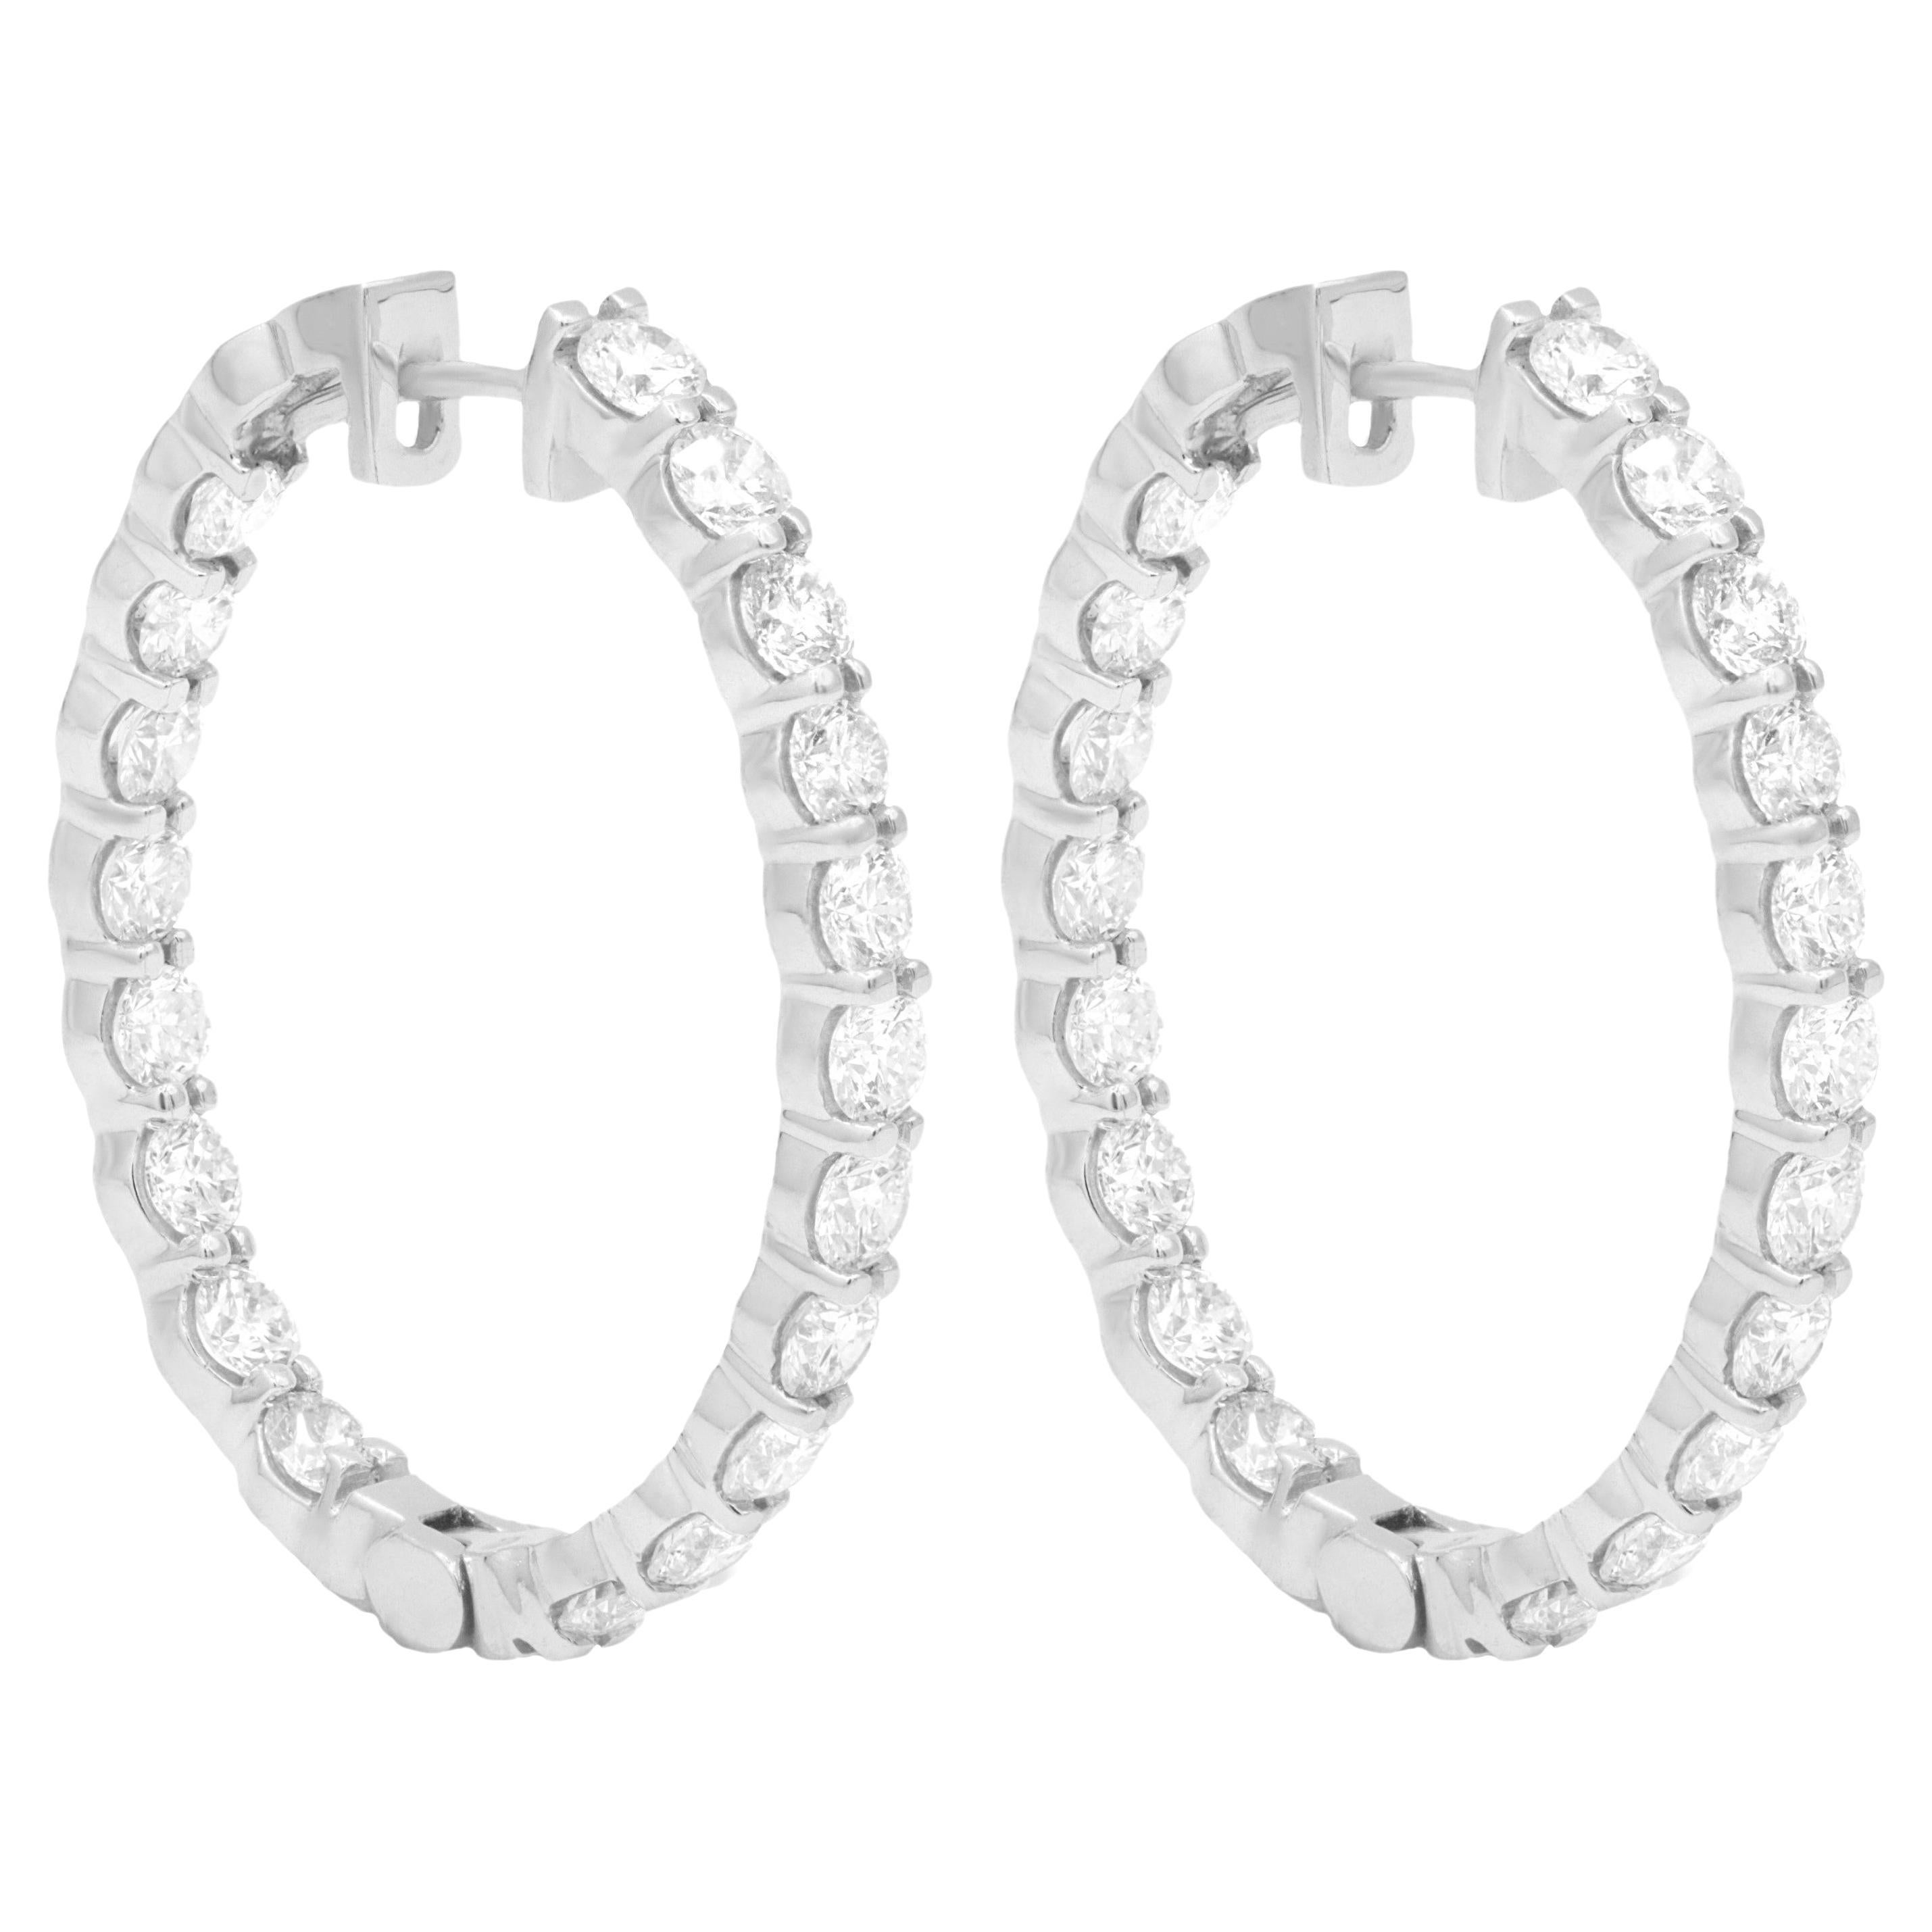 Diana M.14 kt white gold, 1.50" inside-out hoop earrings adorned with 8.12 cts 